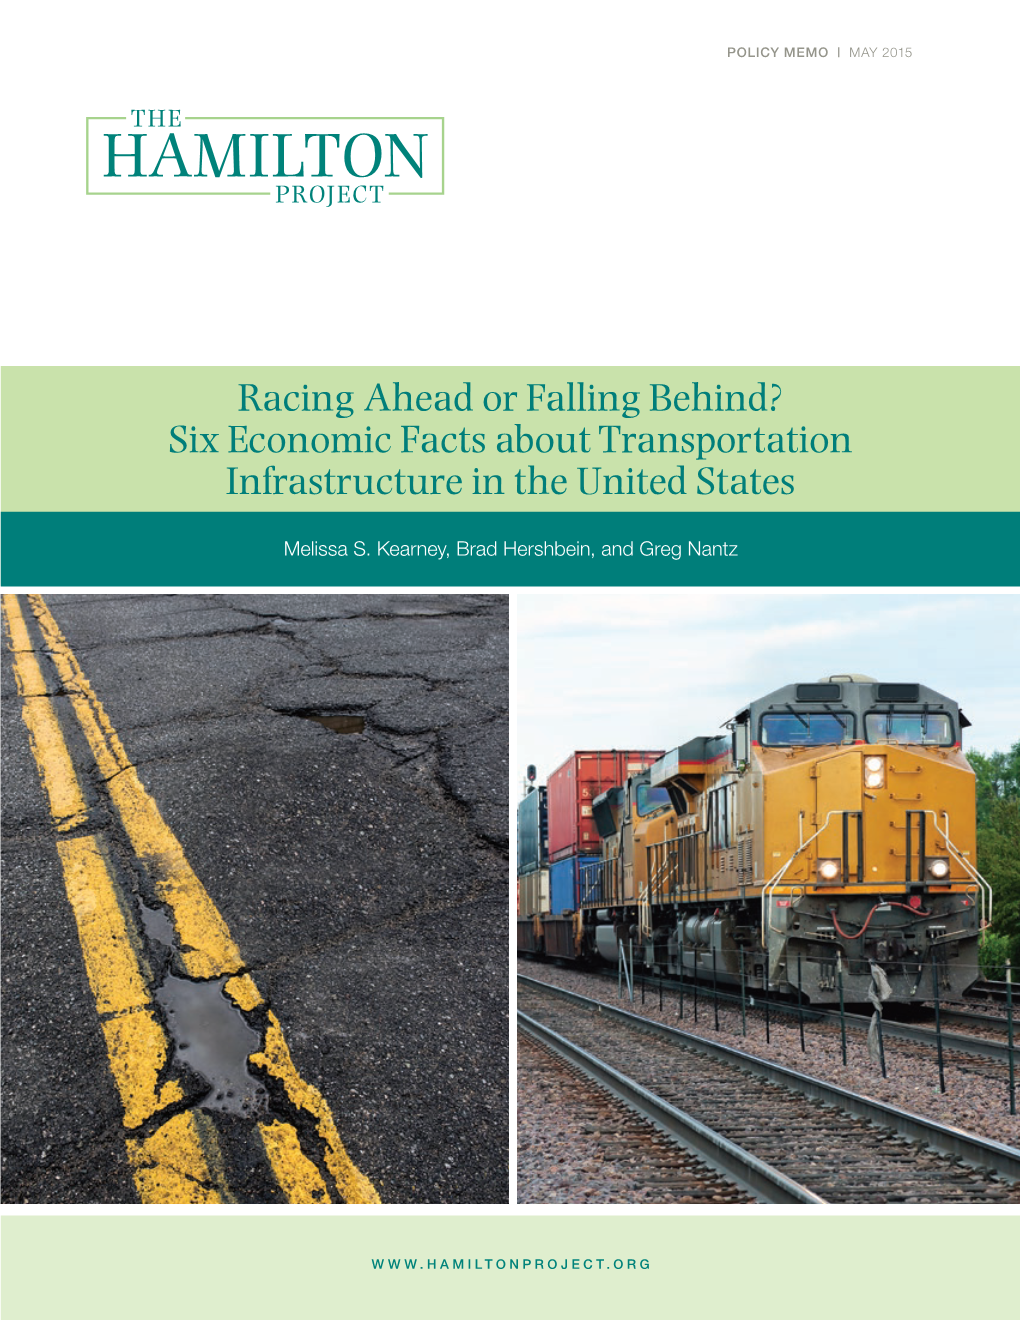 Racing Ahead Or Falling Behind? Six Economic Facts About Transportation Infrastructure in the United States